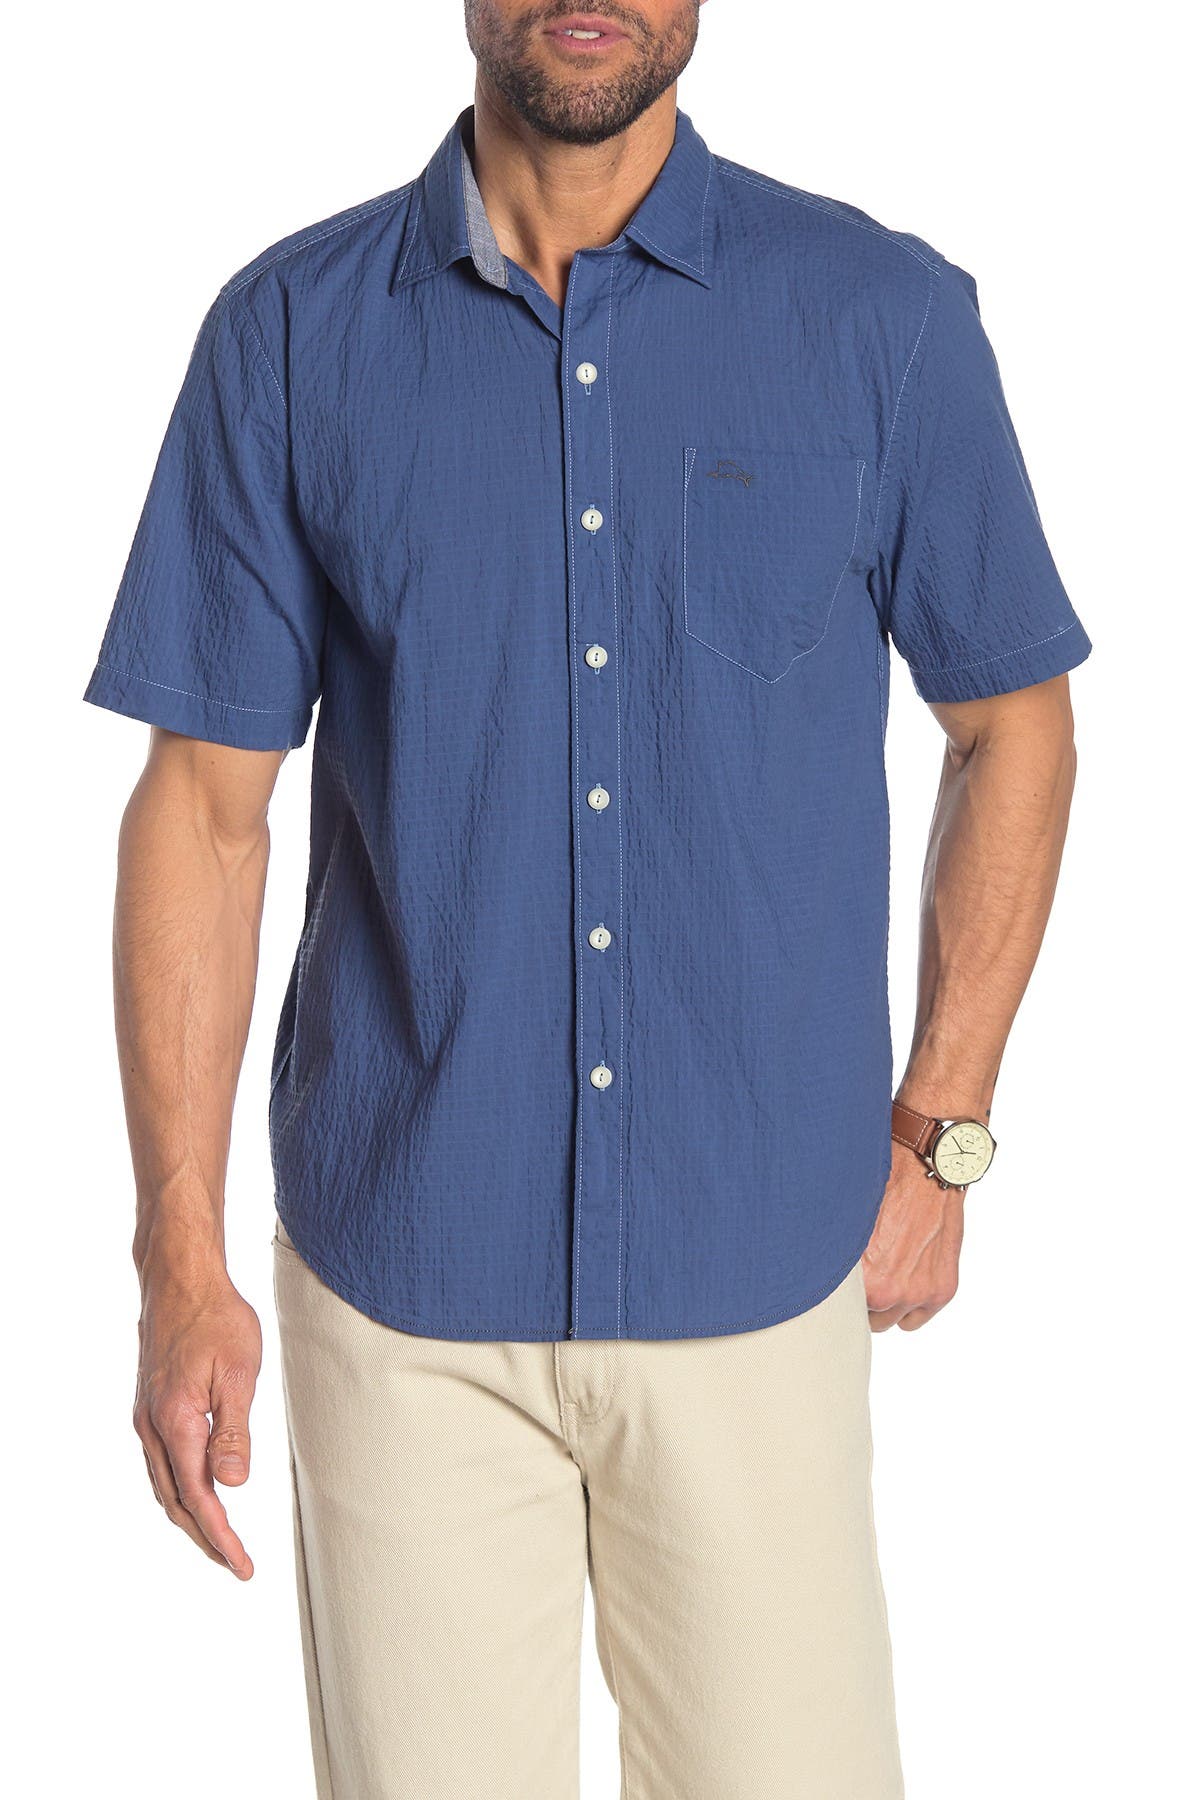 Tommy Bahama | The Salvatore Button 